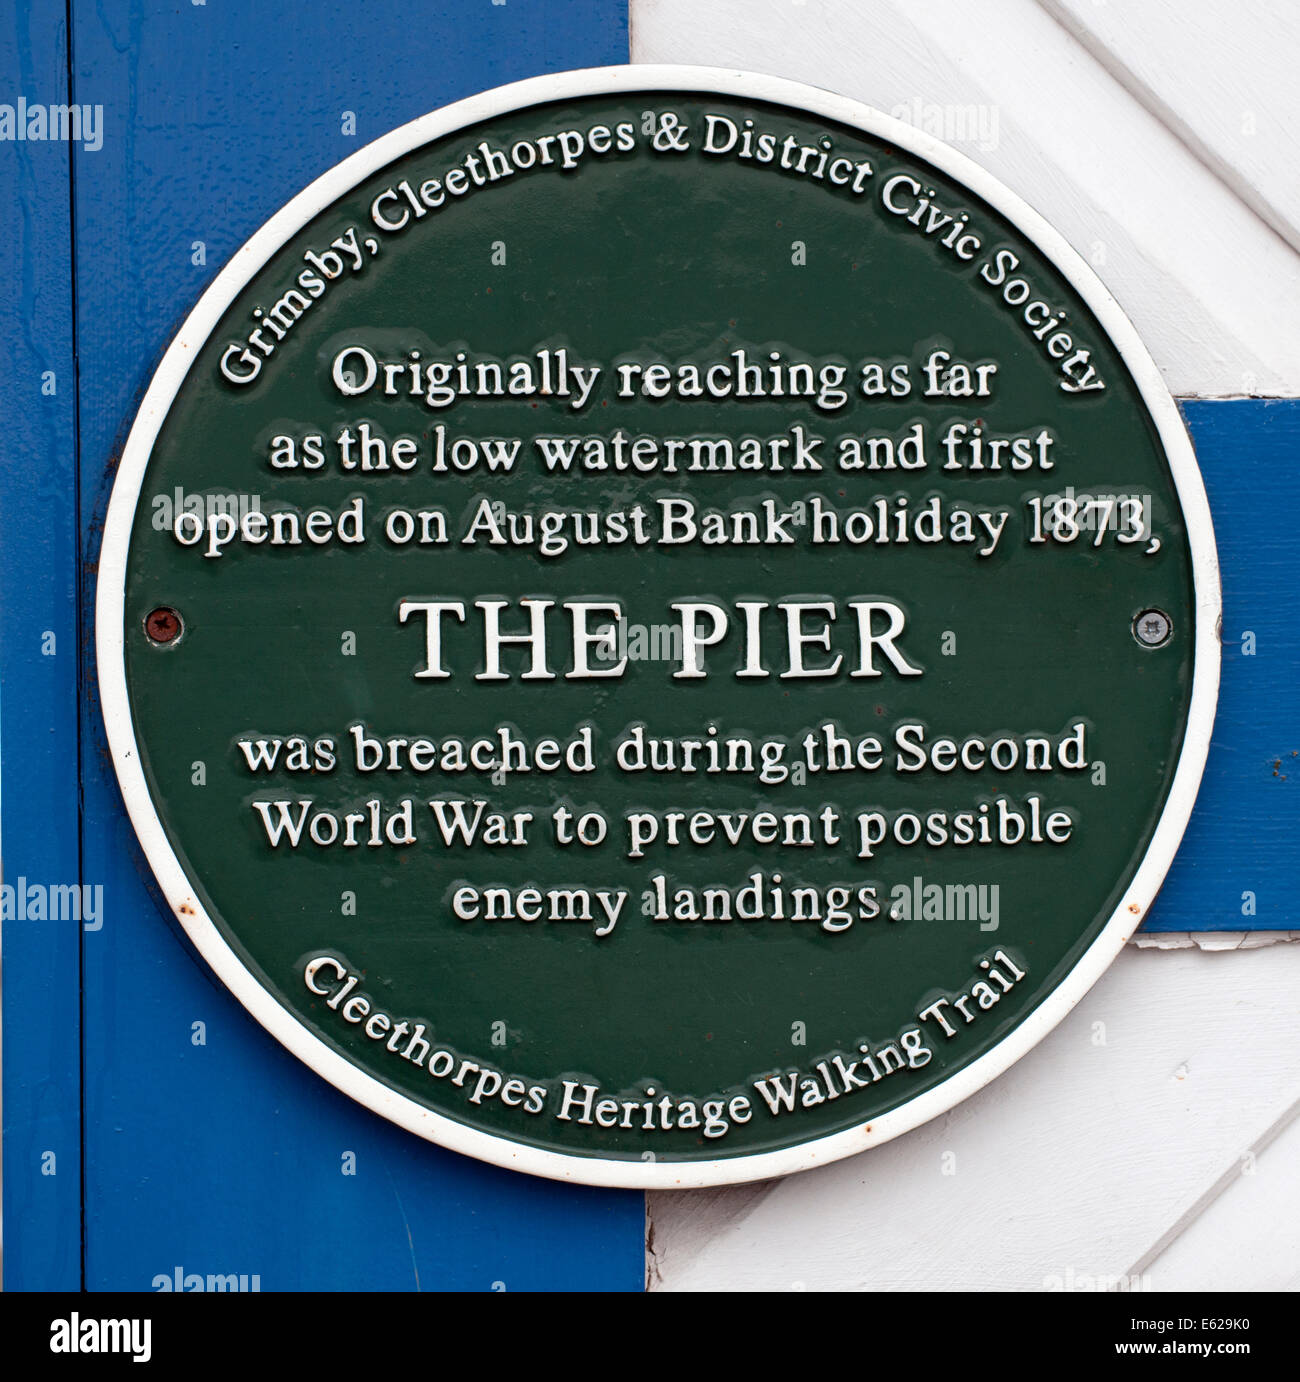 Green plaque at Cleethorpes Pier, Cleethorpes, North East Linolnshire. Stock Photo